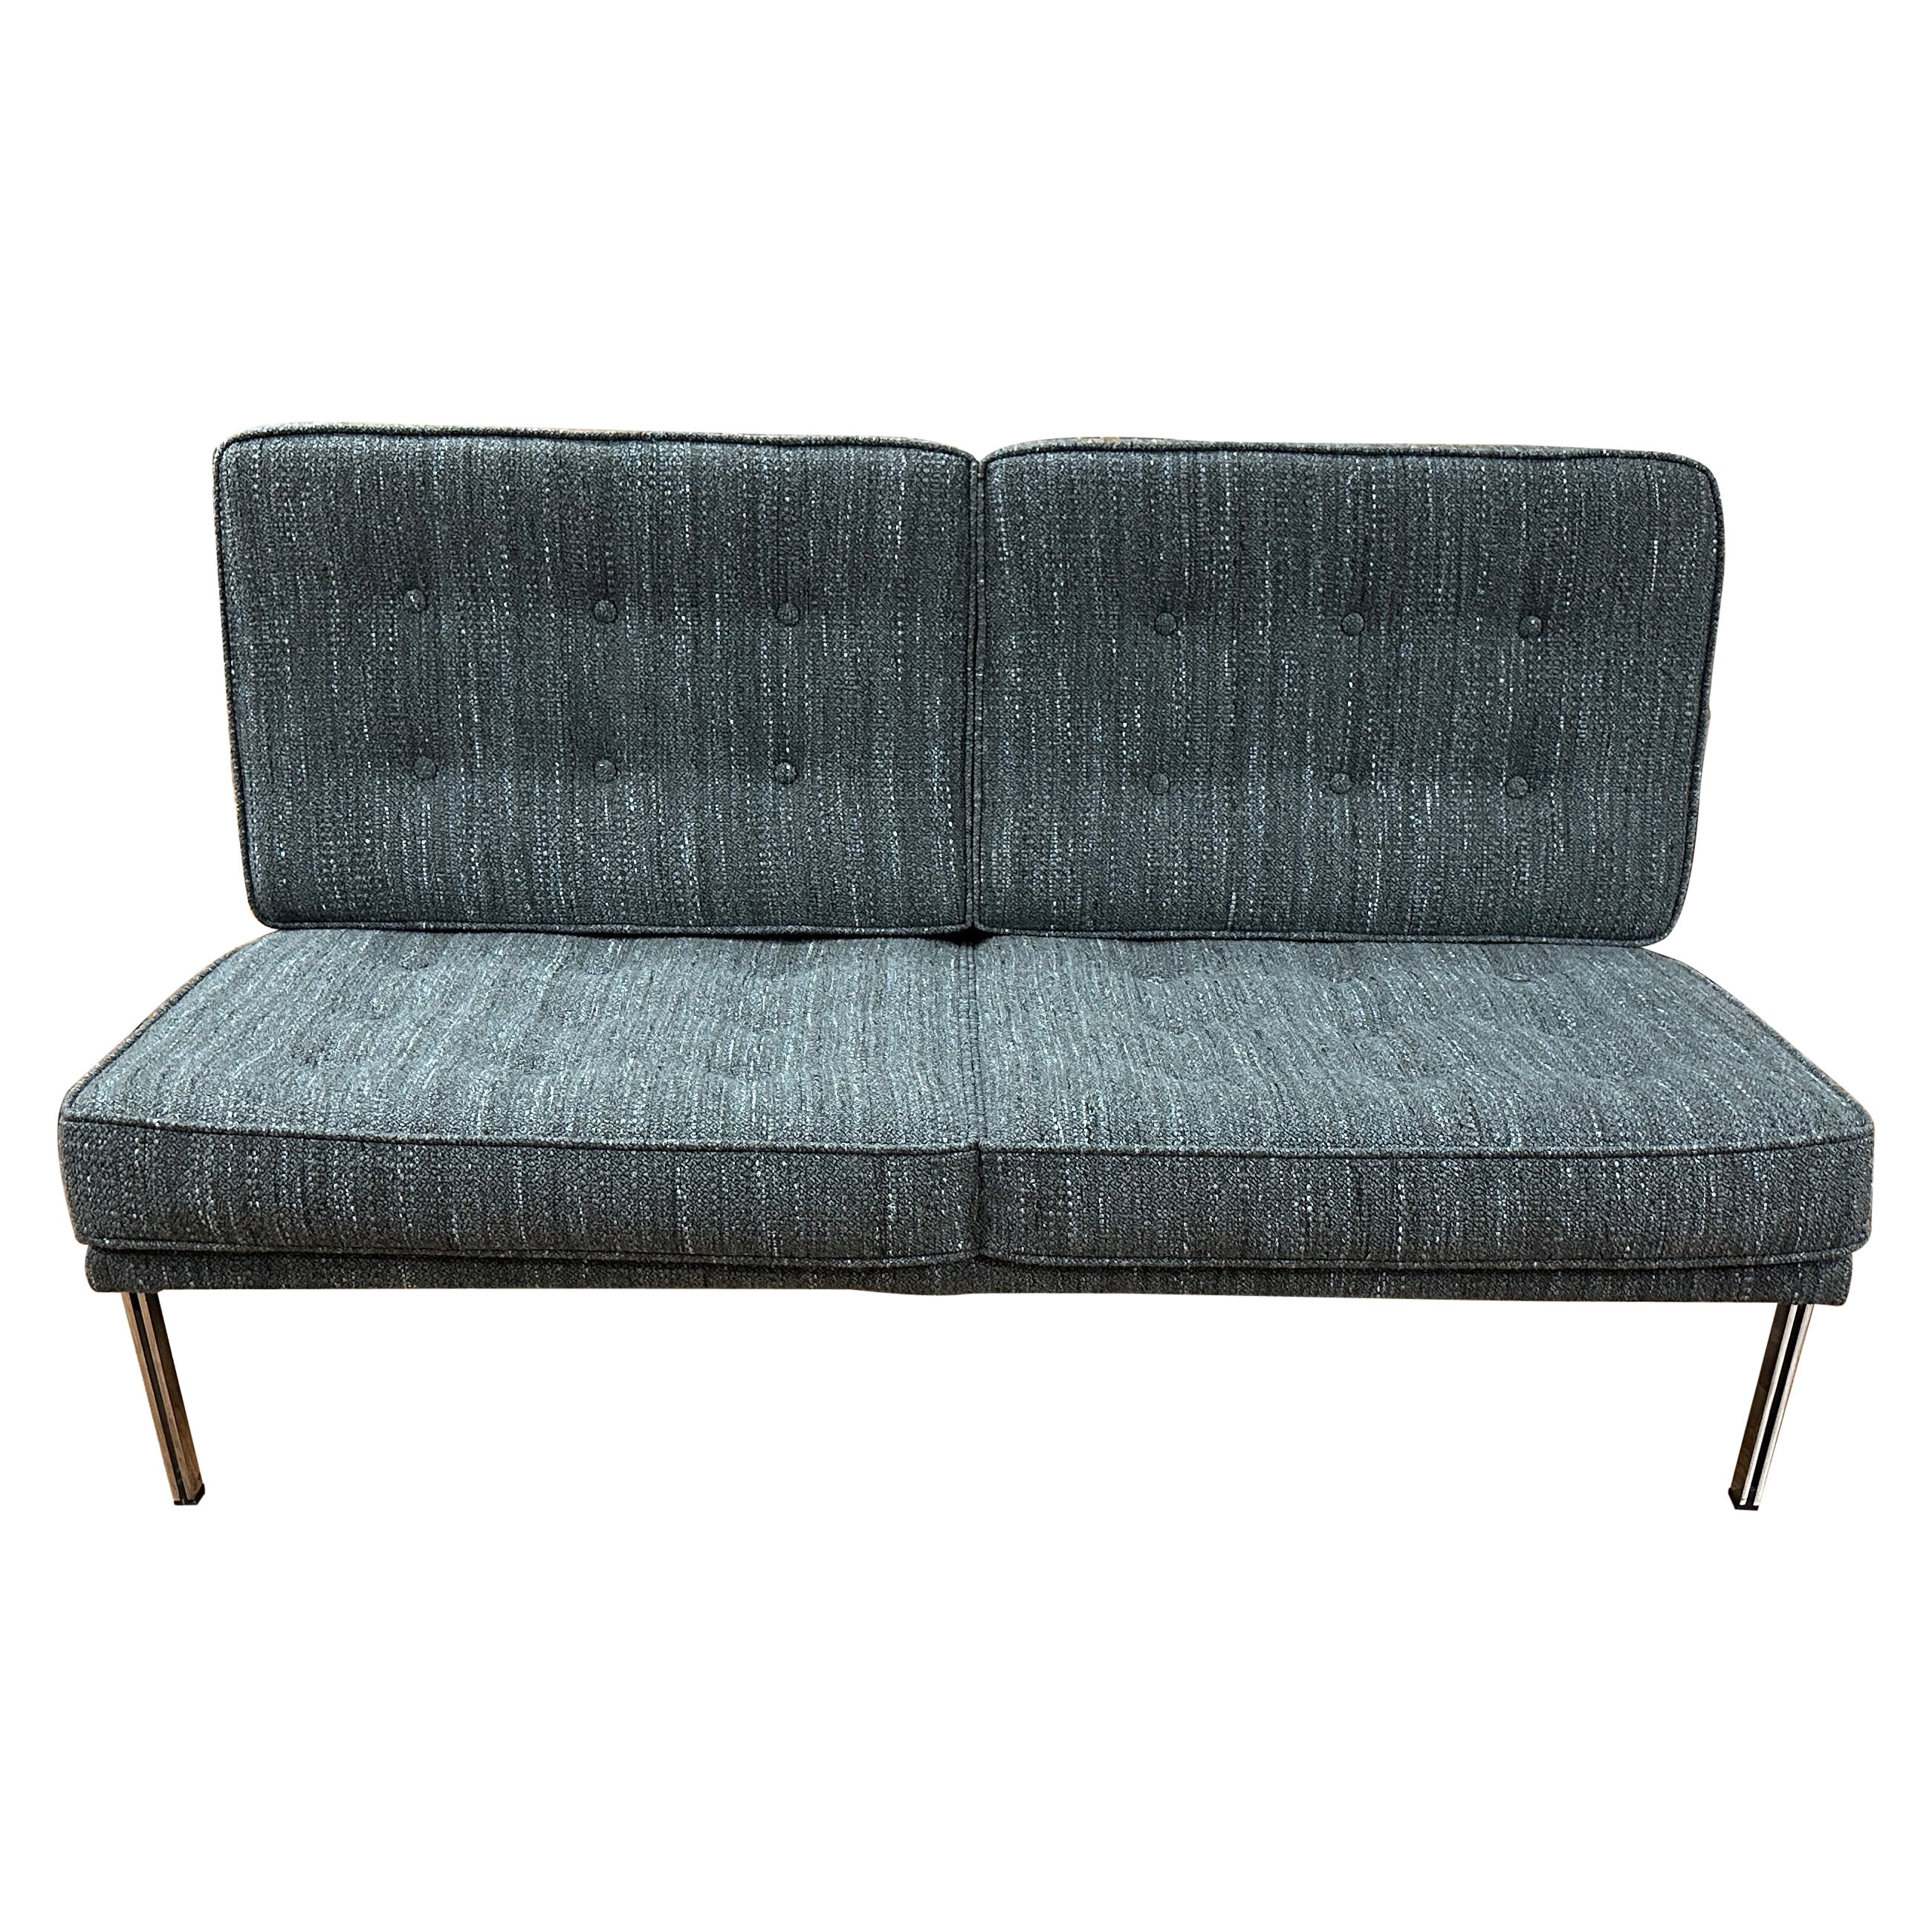 Knoll Parallel Bar Sofa Re-Upholstered in Knoll Rivington Fabric For Sale